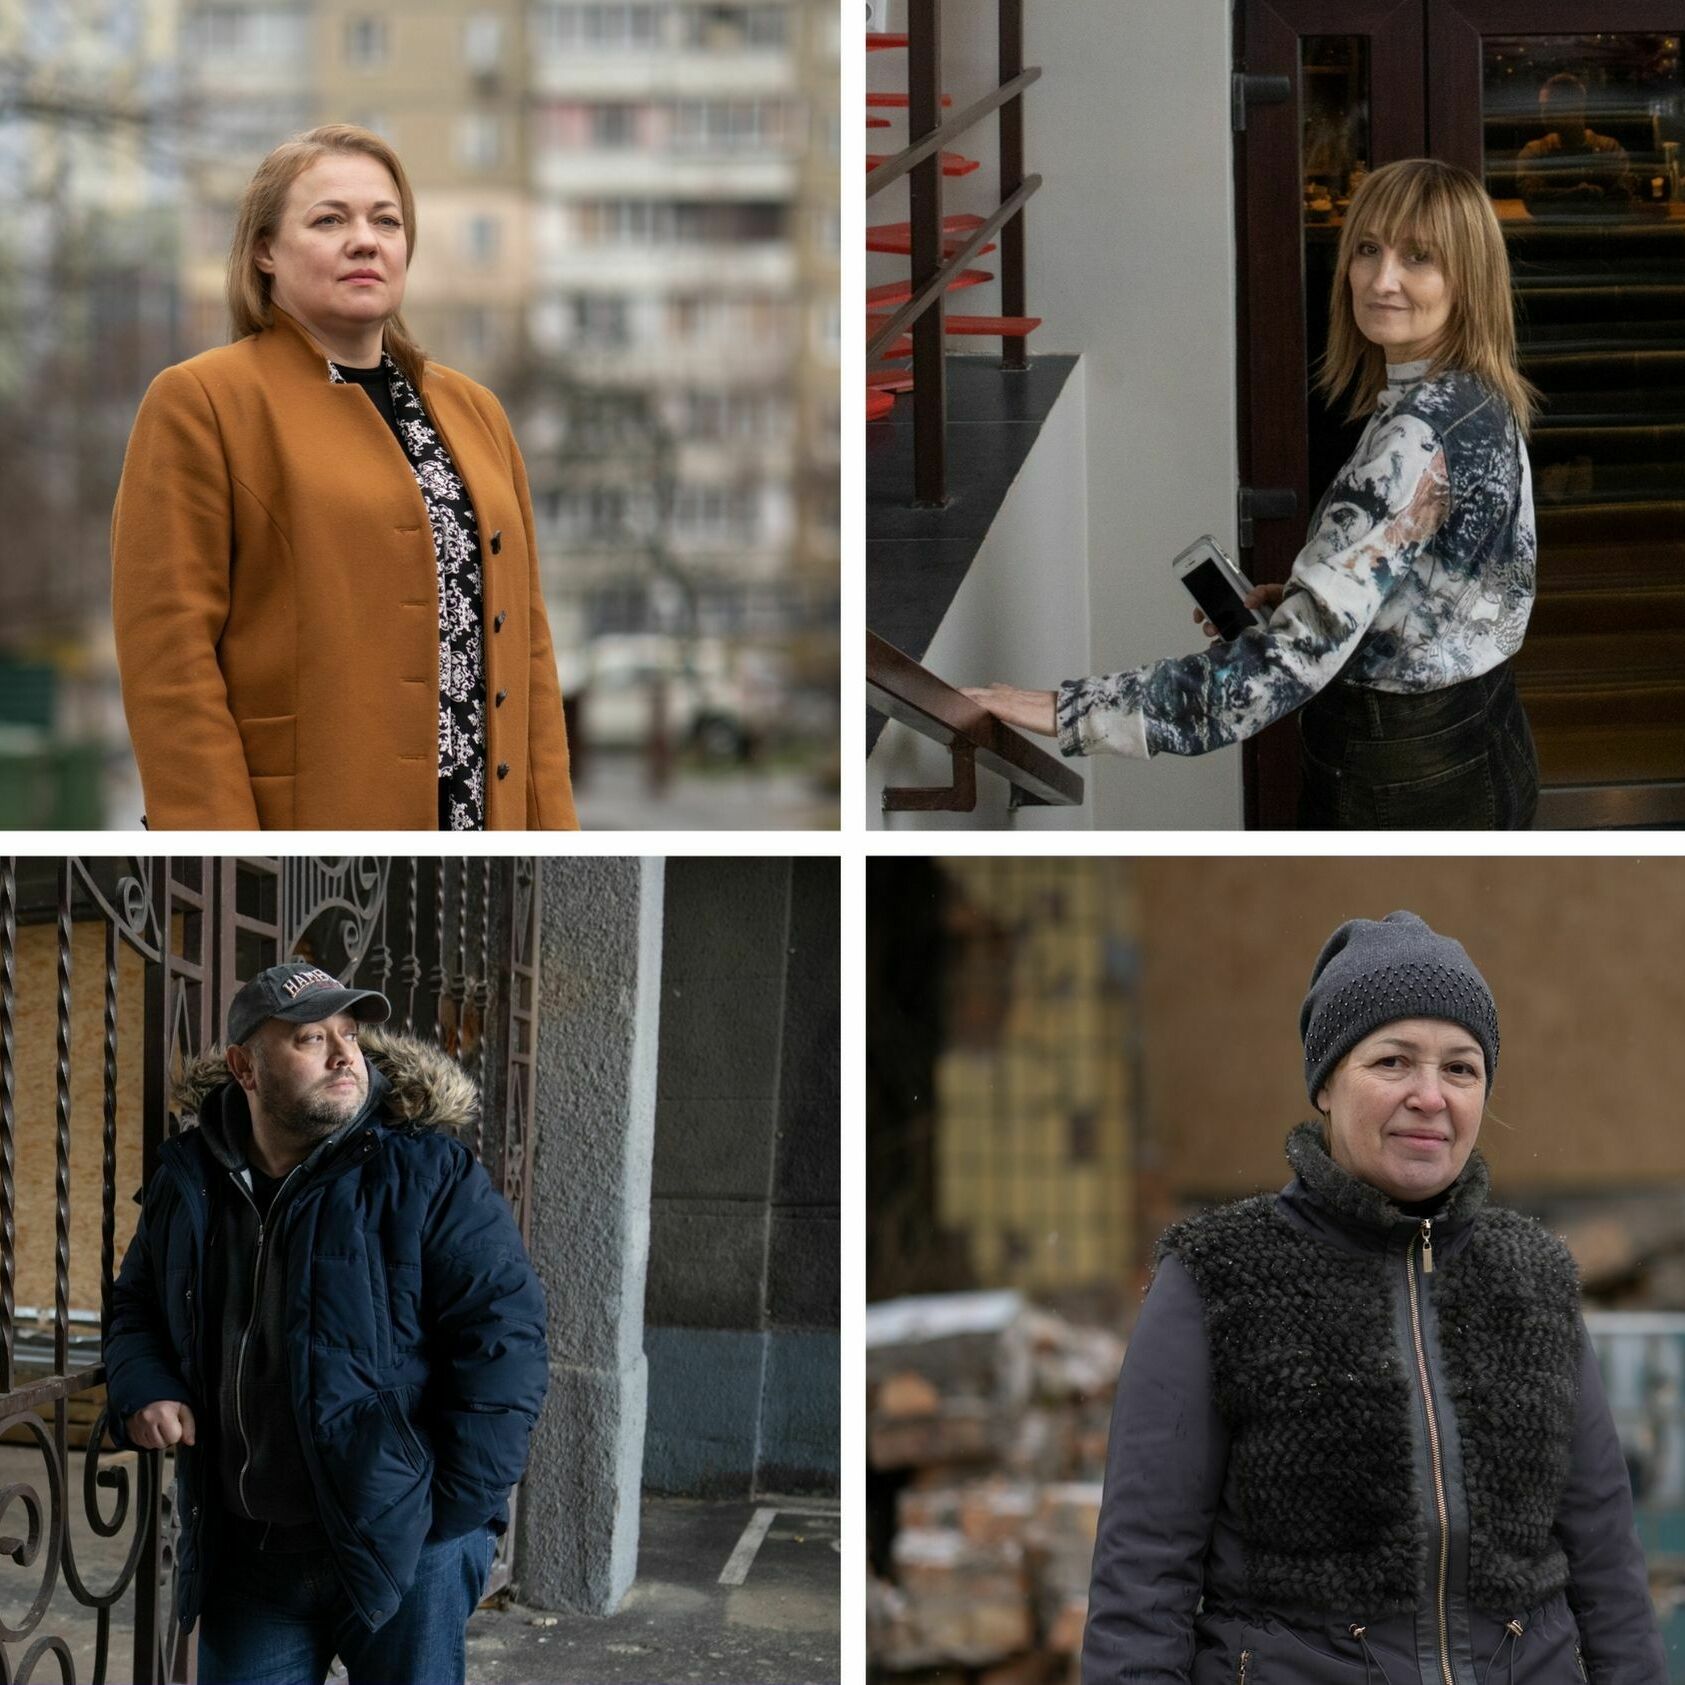 After 2 years of war in Ukraine, 6 cities hold out hope under fire